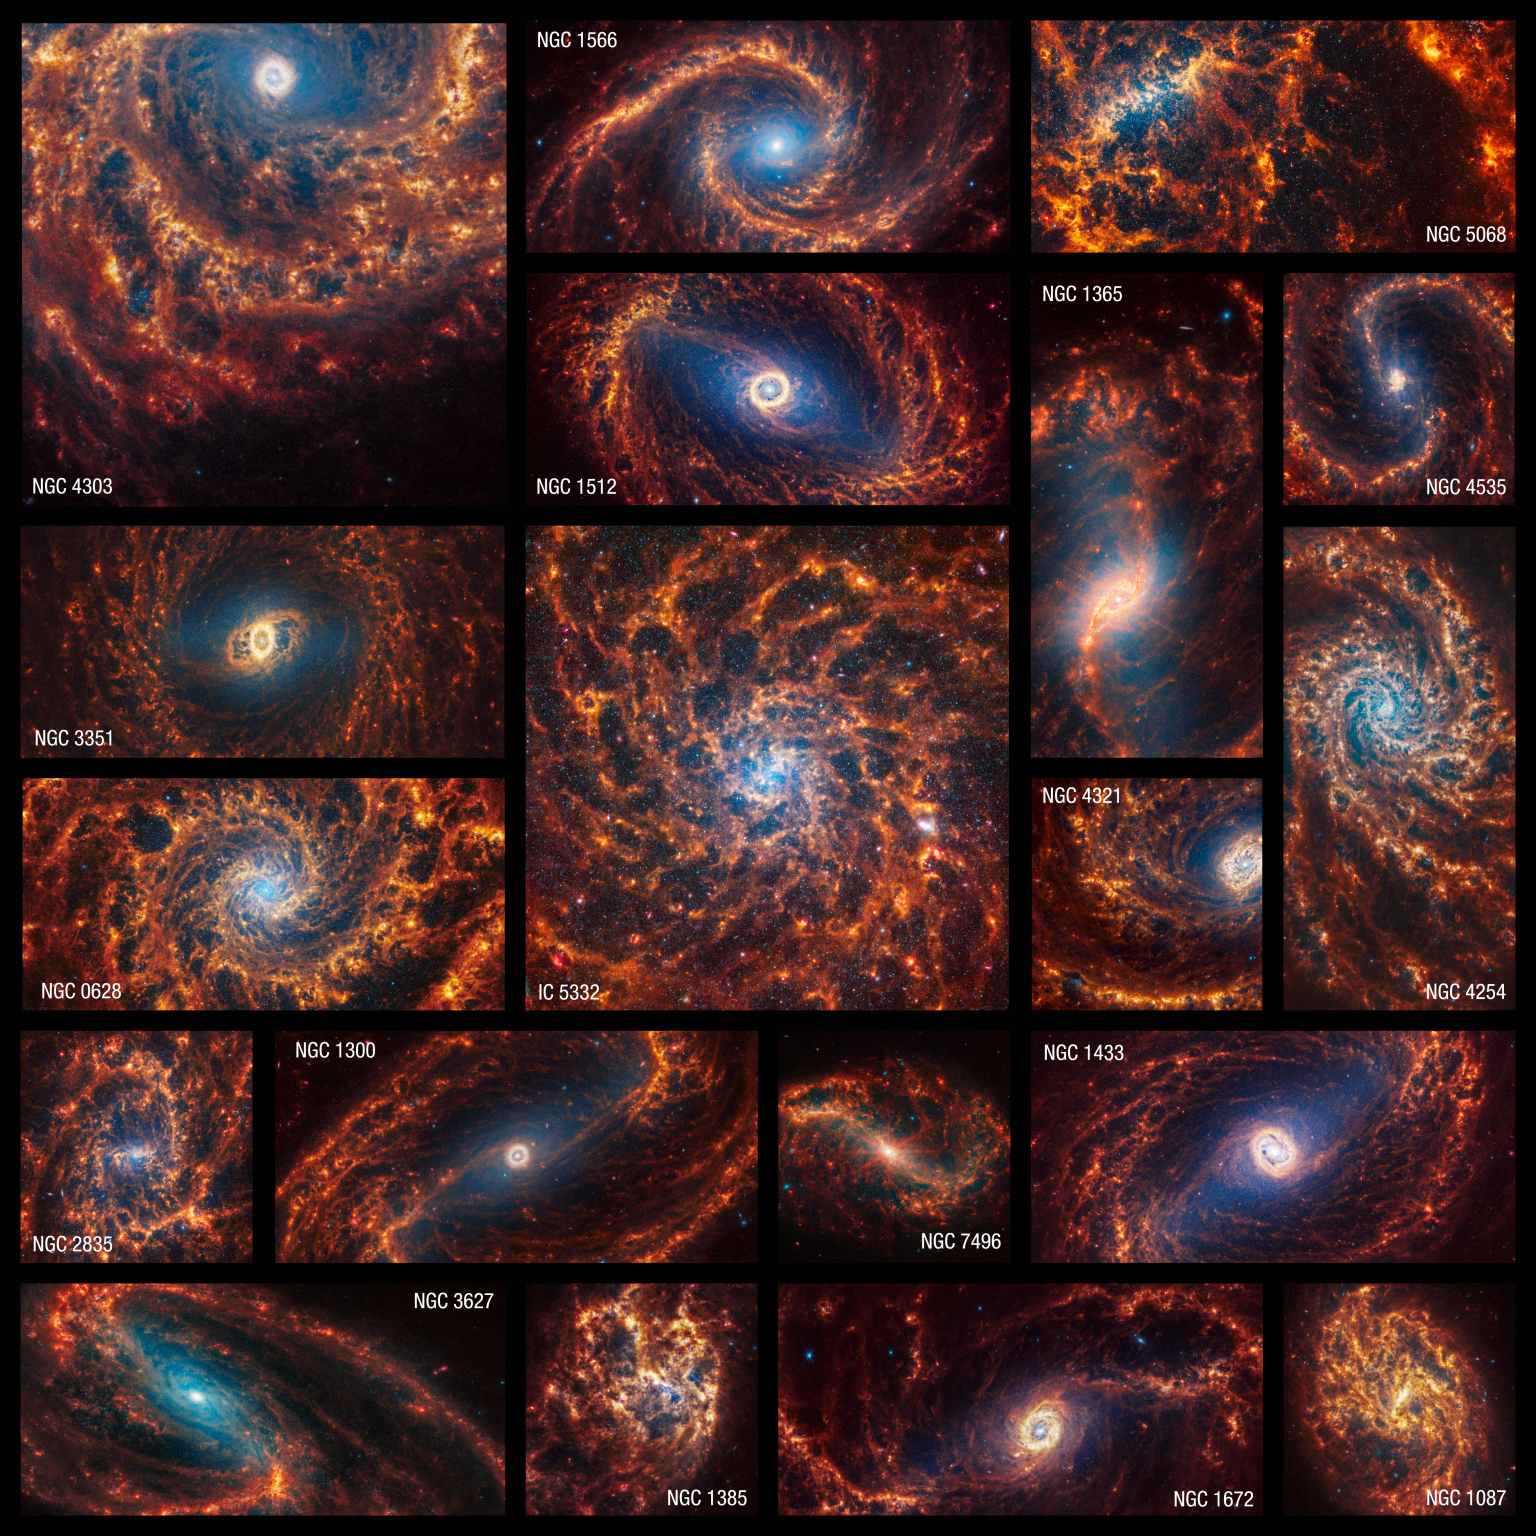 Nineteen Webb images of face-on spiral galaxies are combined in a mosaic. Some appear within squares, and others horizontal or vertical rectangles. Many galaxies have blue hazes toward the centers, and all have orange spiral arms. Many have clear bar shaped-structures at their centers, but a few have spirals that begin at their cores. Some of the galaxies’ arms form clear spiral shapes, while others are more irregular. Some of the galaxies’ arms appear to rotate clockwise and others counterclockwise. Most galaxy cores are centered, but a few appear toward an image’s edge. Most galaxies appear to extend beyond the captured observations. The galaxies shown, listed in alphabetical order, are IC 5332, NGC 628, NGC 1087, NGC1300, NGC 1365, NGC 1385, NGC 1433, NGC 1512, NGC 1566, NGC 1672, NGC 2835, NGC 3351, NGC 3627, NGC 4254, NGC 4303, NGC 4321, NGC 4535, NGC 5068, and NGC 7496.